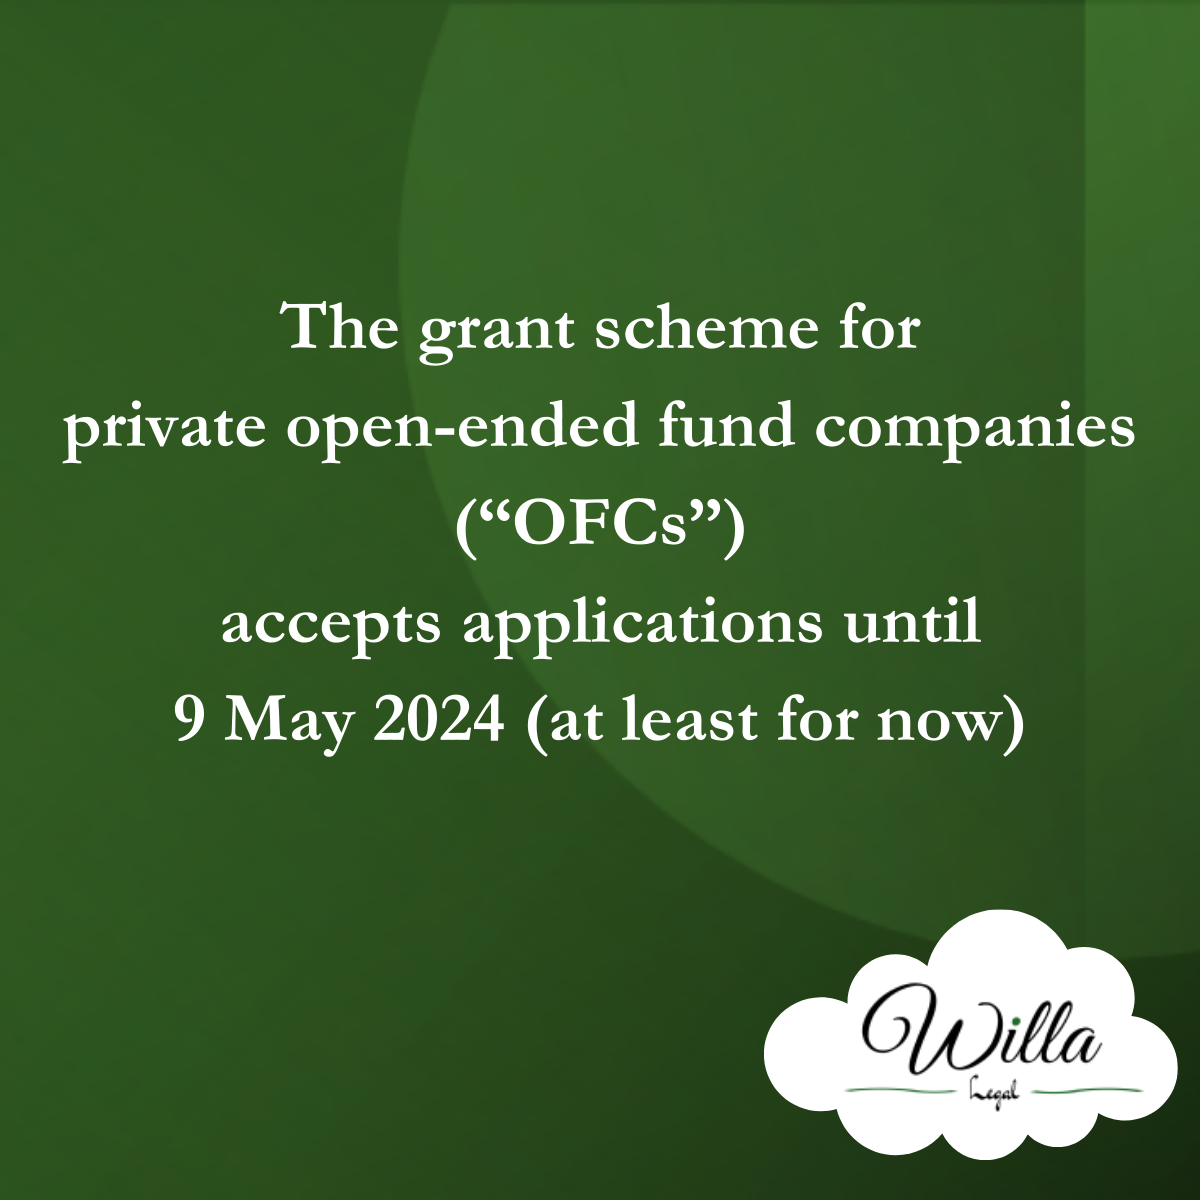 The grant scheme for private open-ended fund companies (“OFCs”) accepts applications until 9 May 2024